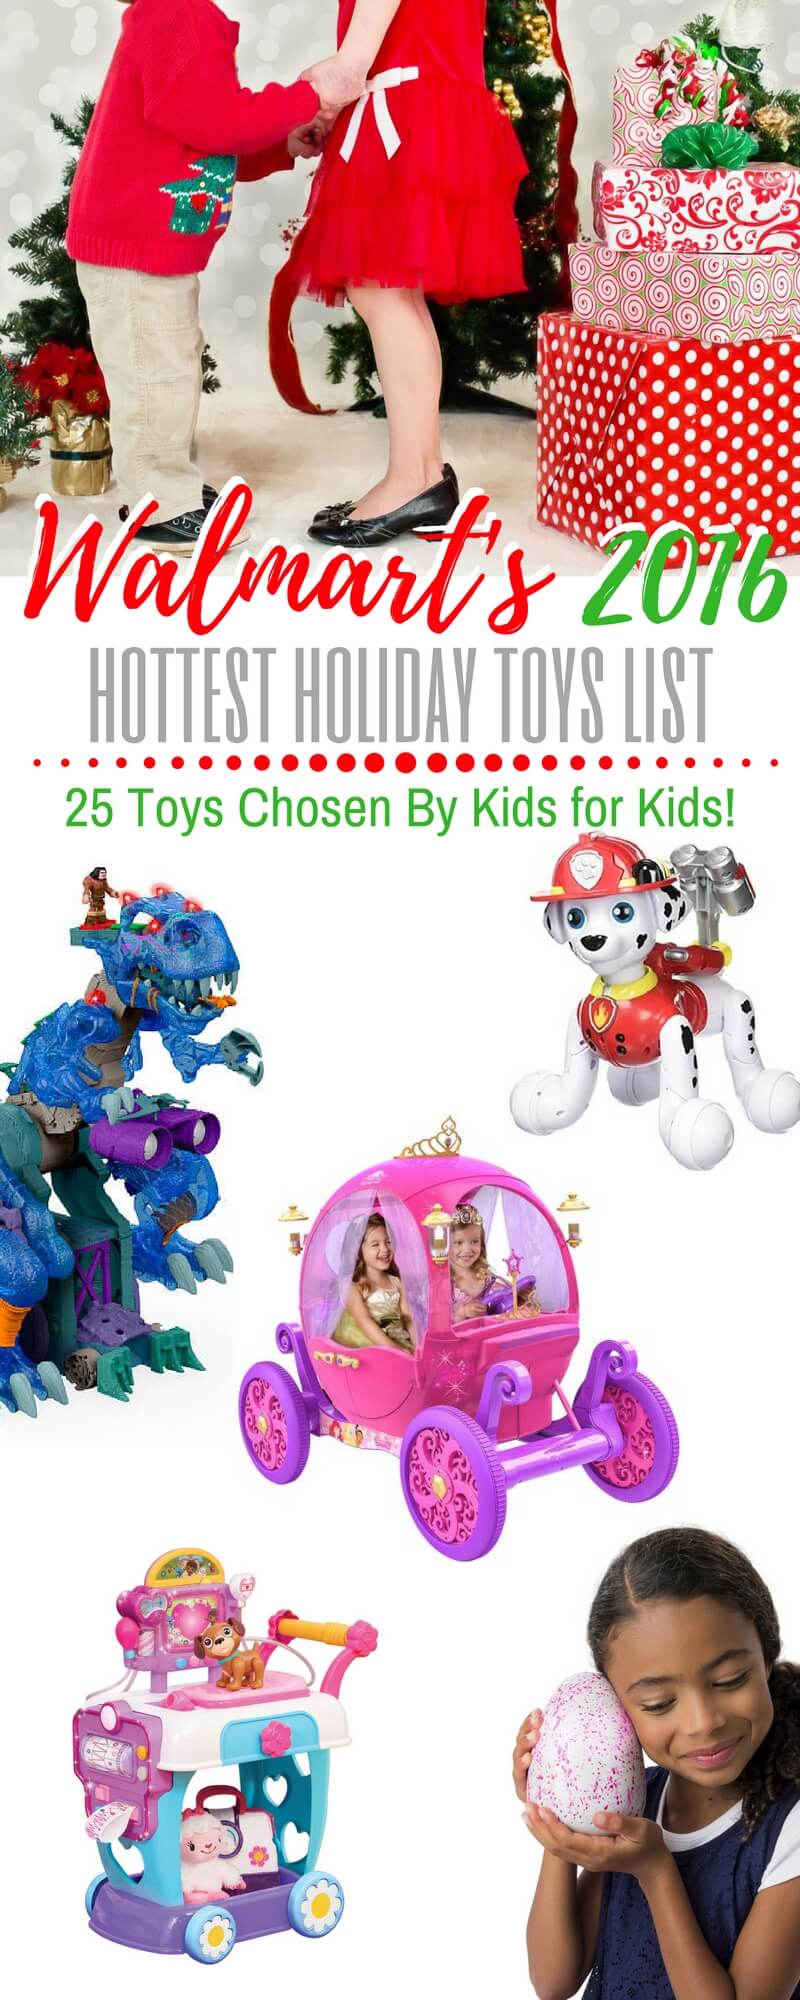 Walmart's Chosen By Kids TOP Holiday Toys List 2016